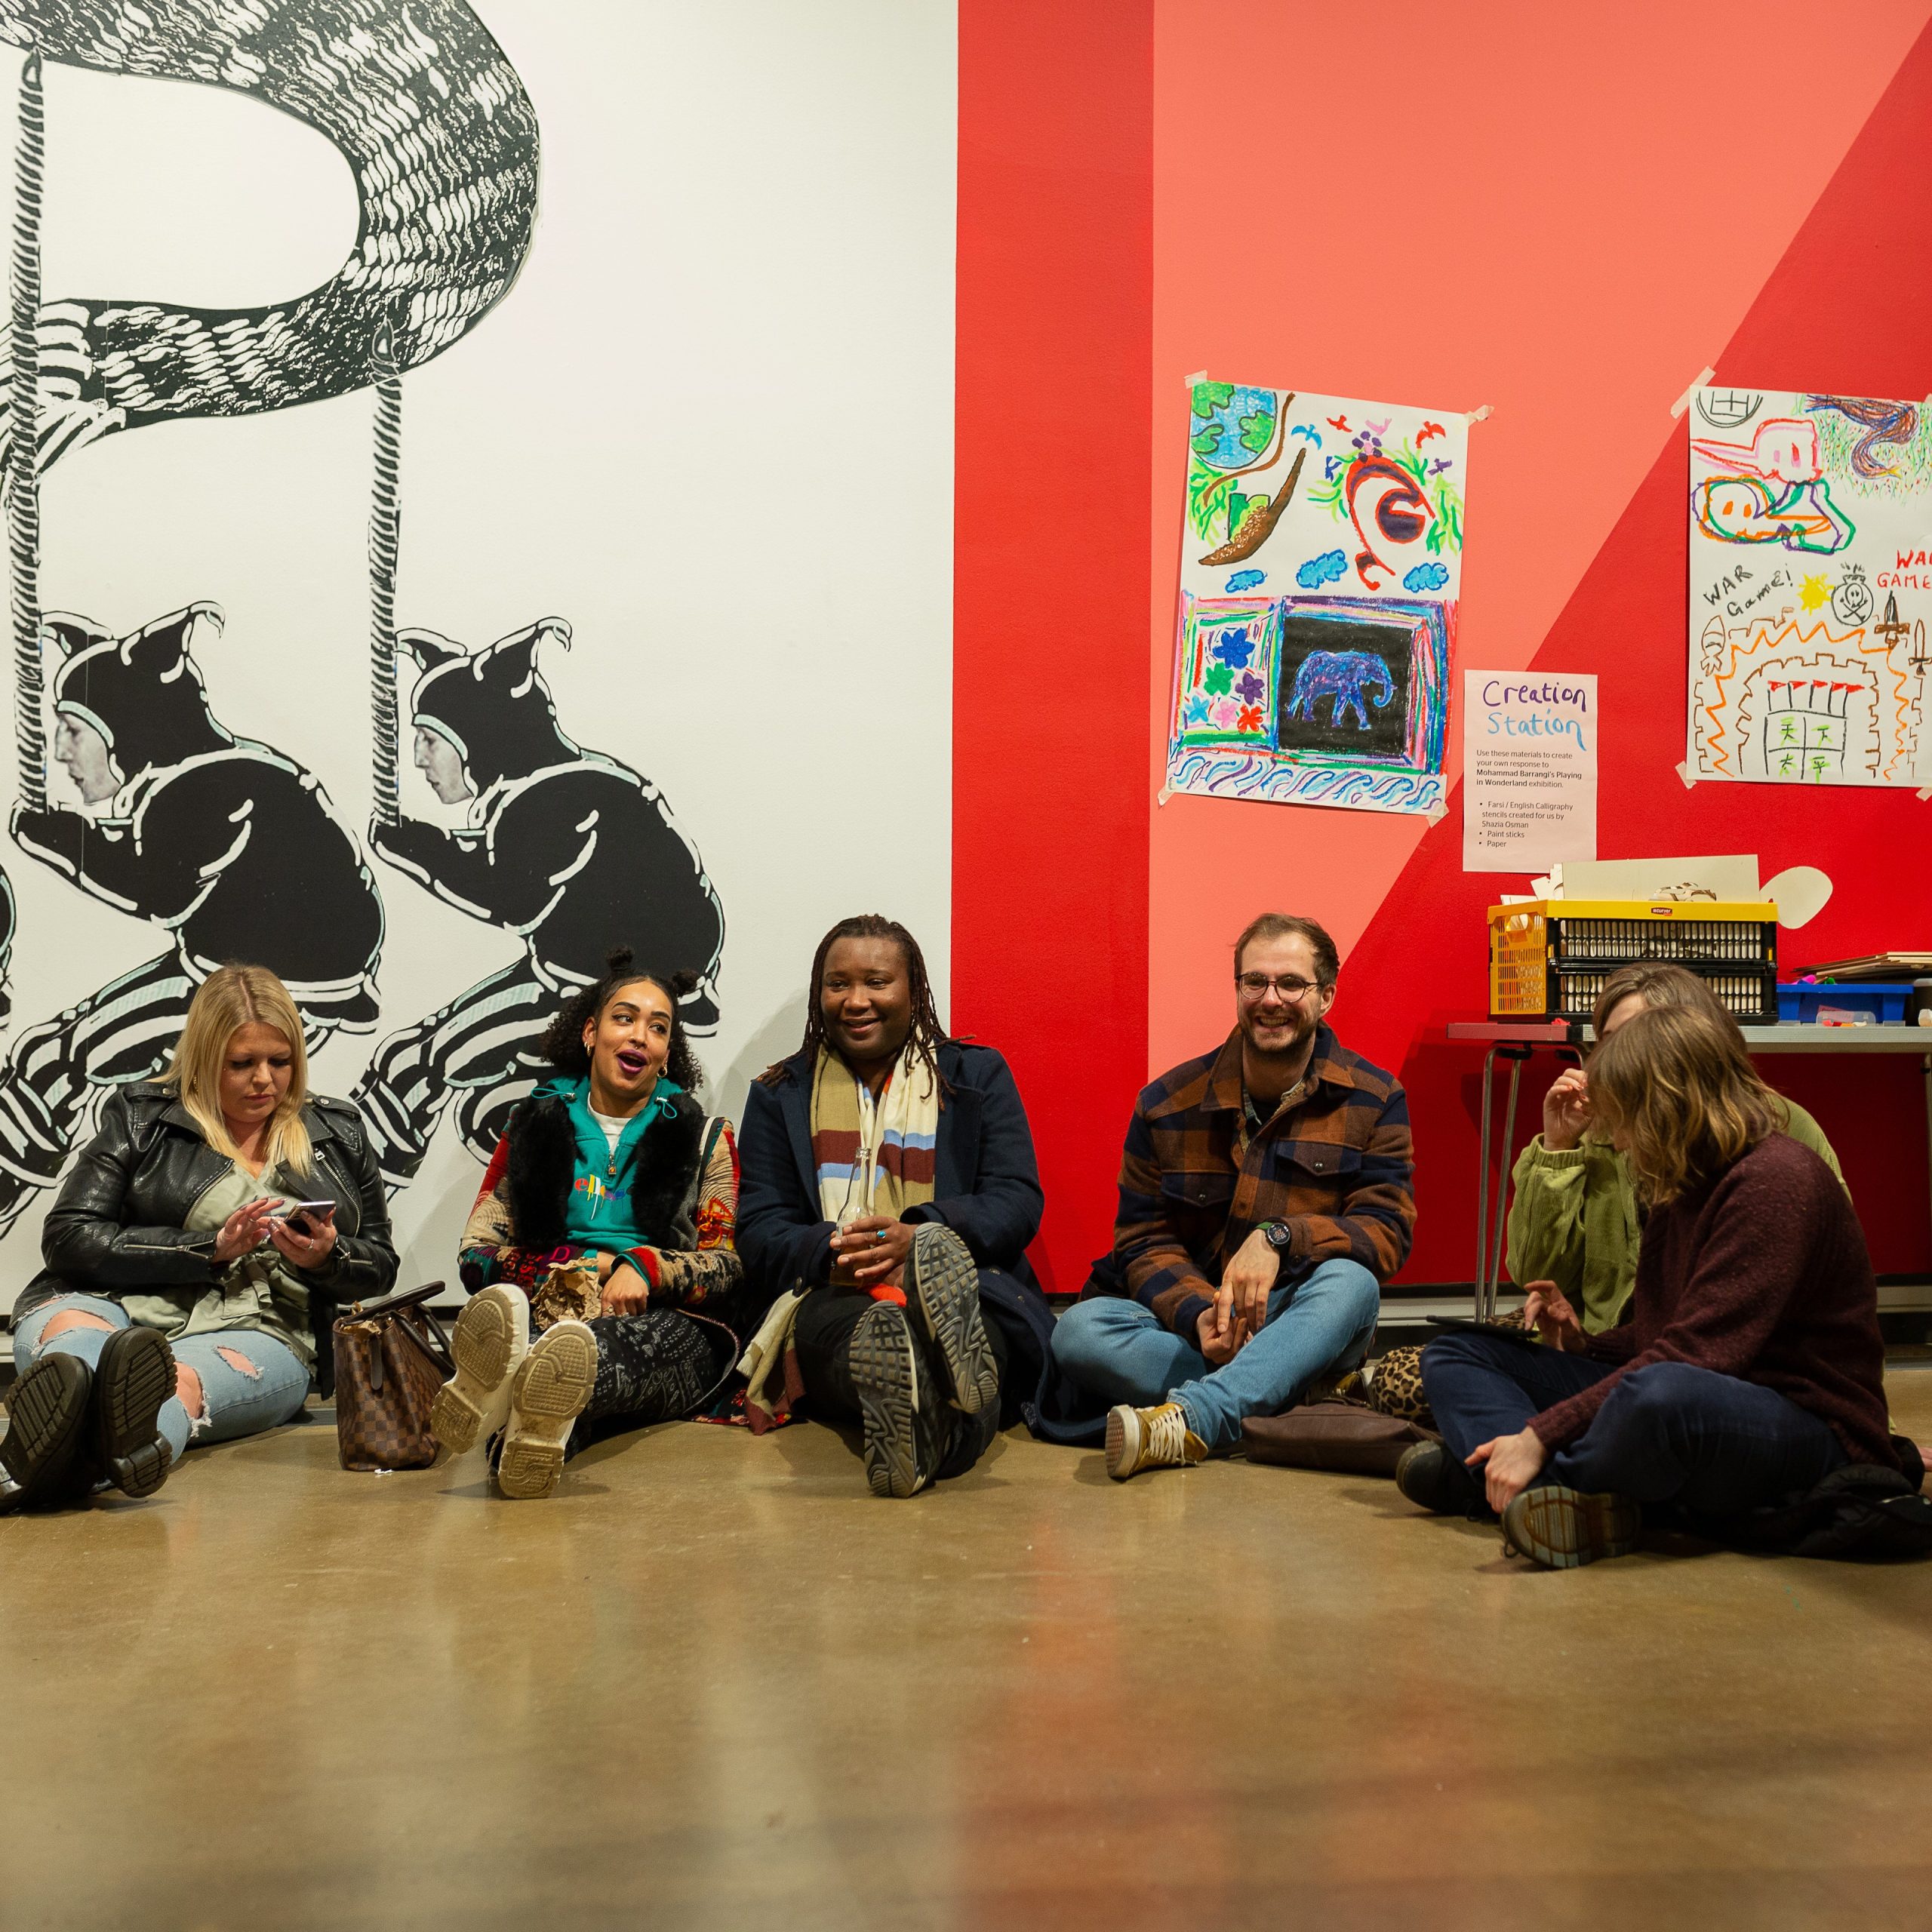 A group of five people sat on the floor of a gallery talking and laughing together. They are leaning against colour painted walls, with self-made crayon artwork stuck onto the wall.